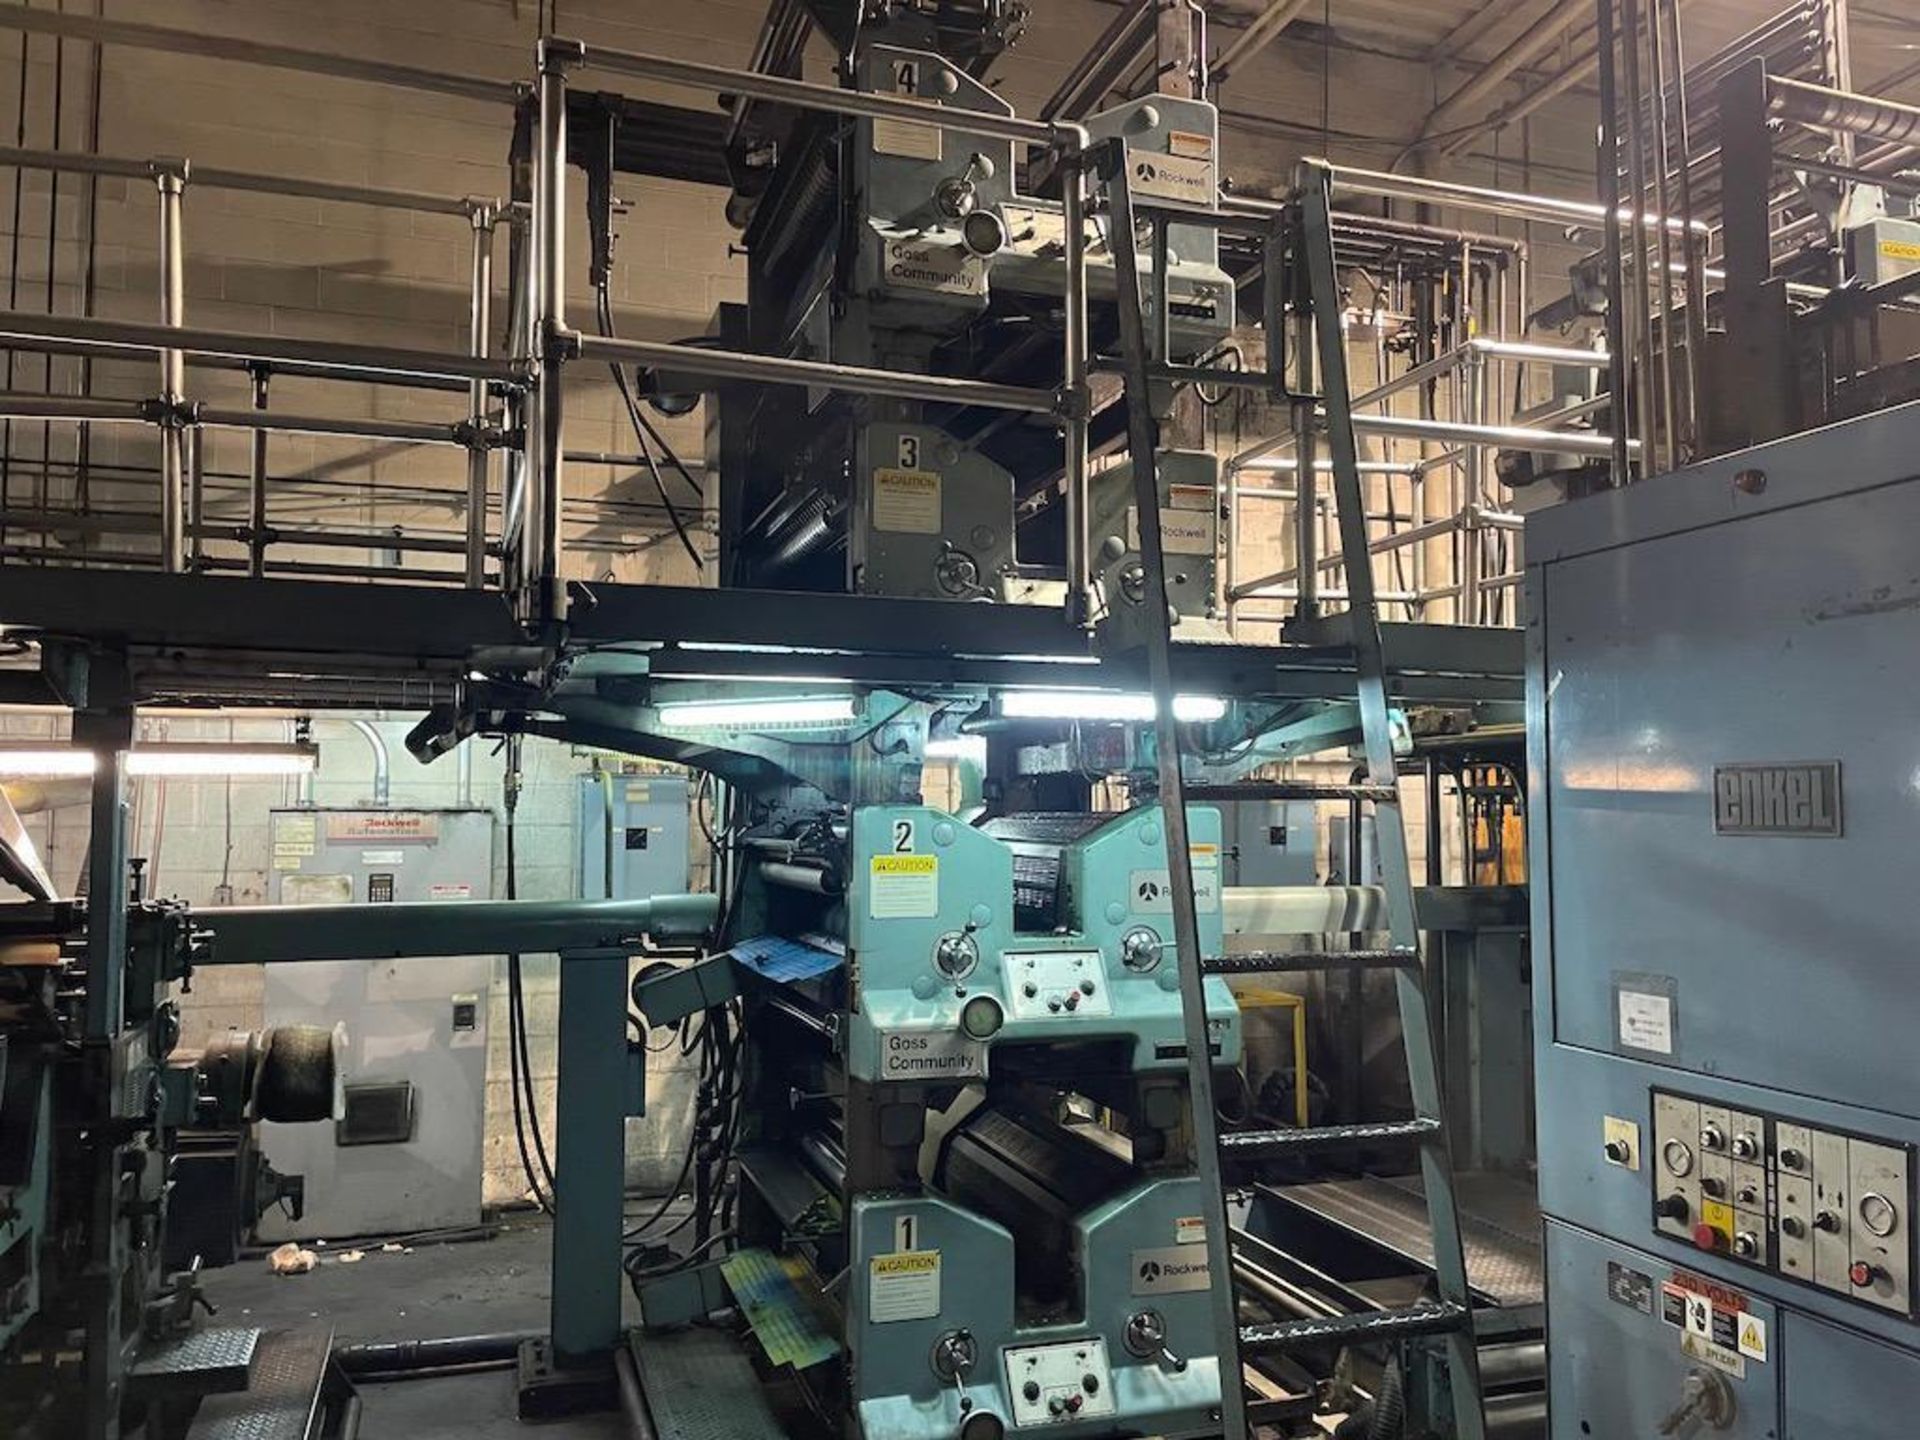 LOT GOSS PRINTING LINE, LOTS 58A-58G PLUS ELECTRICAL, INCLUDING: 28 UNITS: (5) 4 HIGH, (4) 2 HIGH 34 - Image 10 of 27